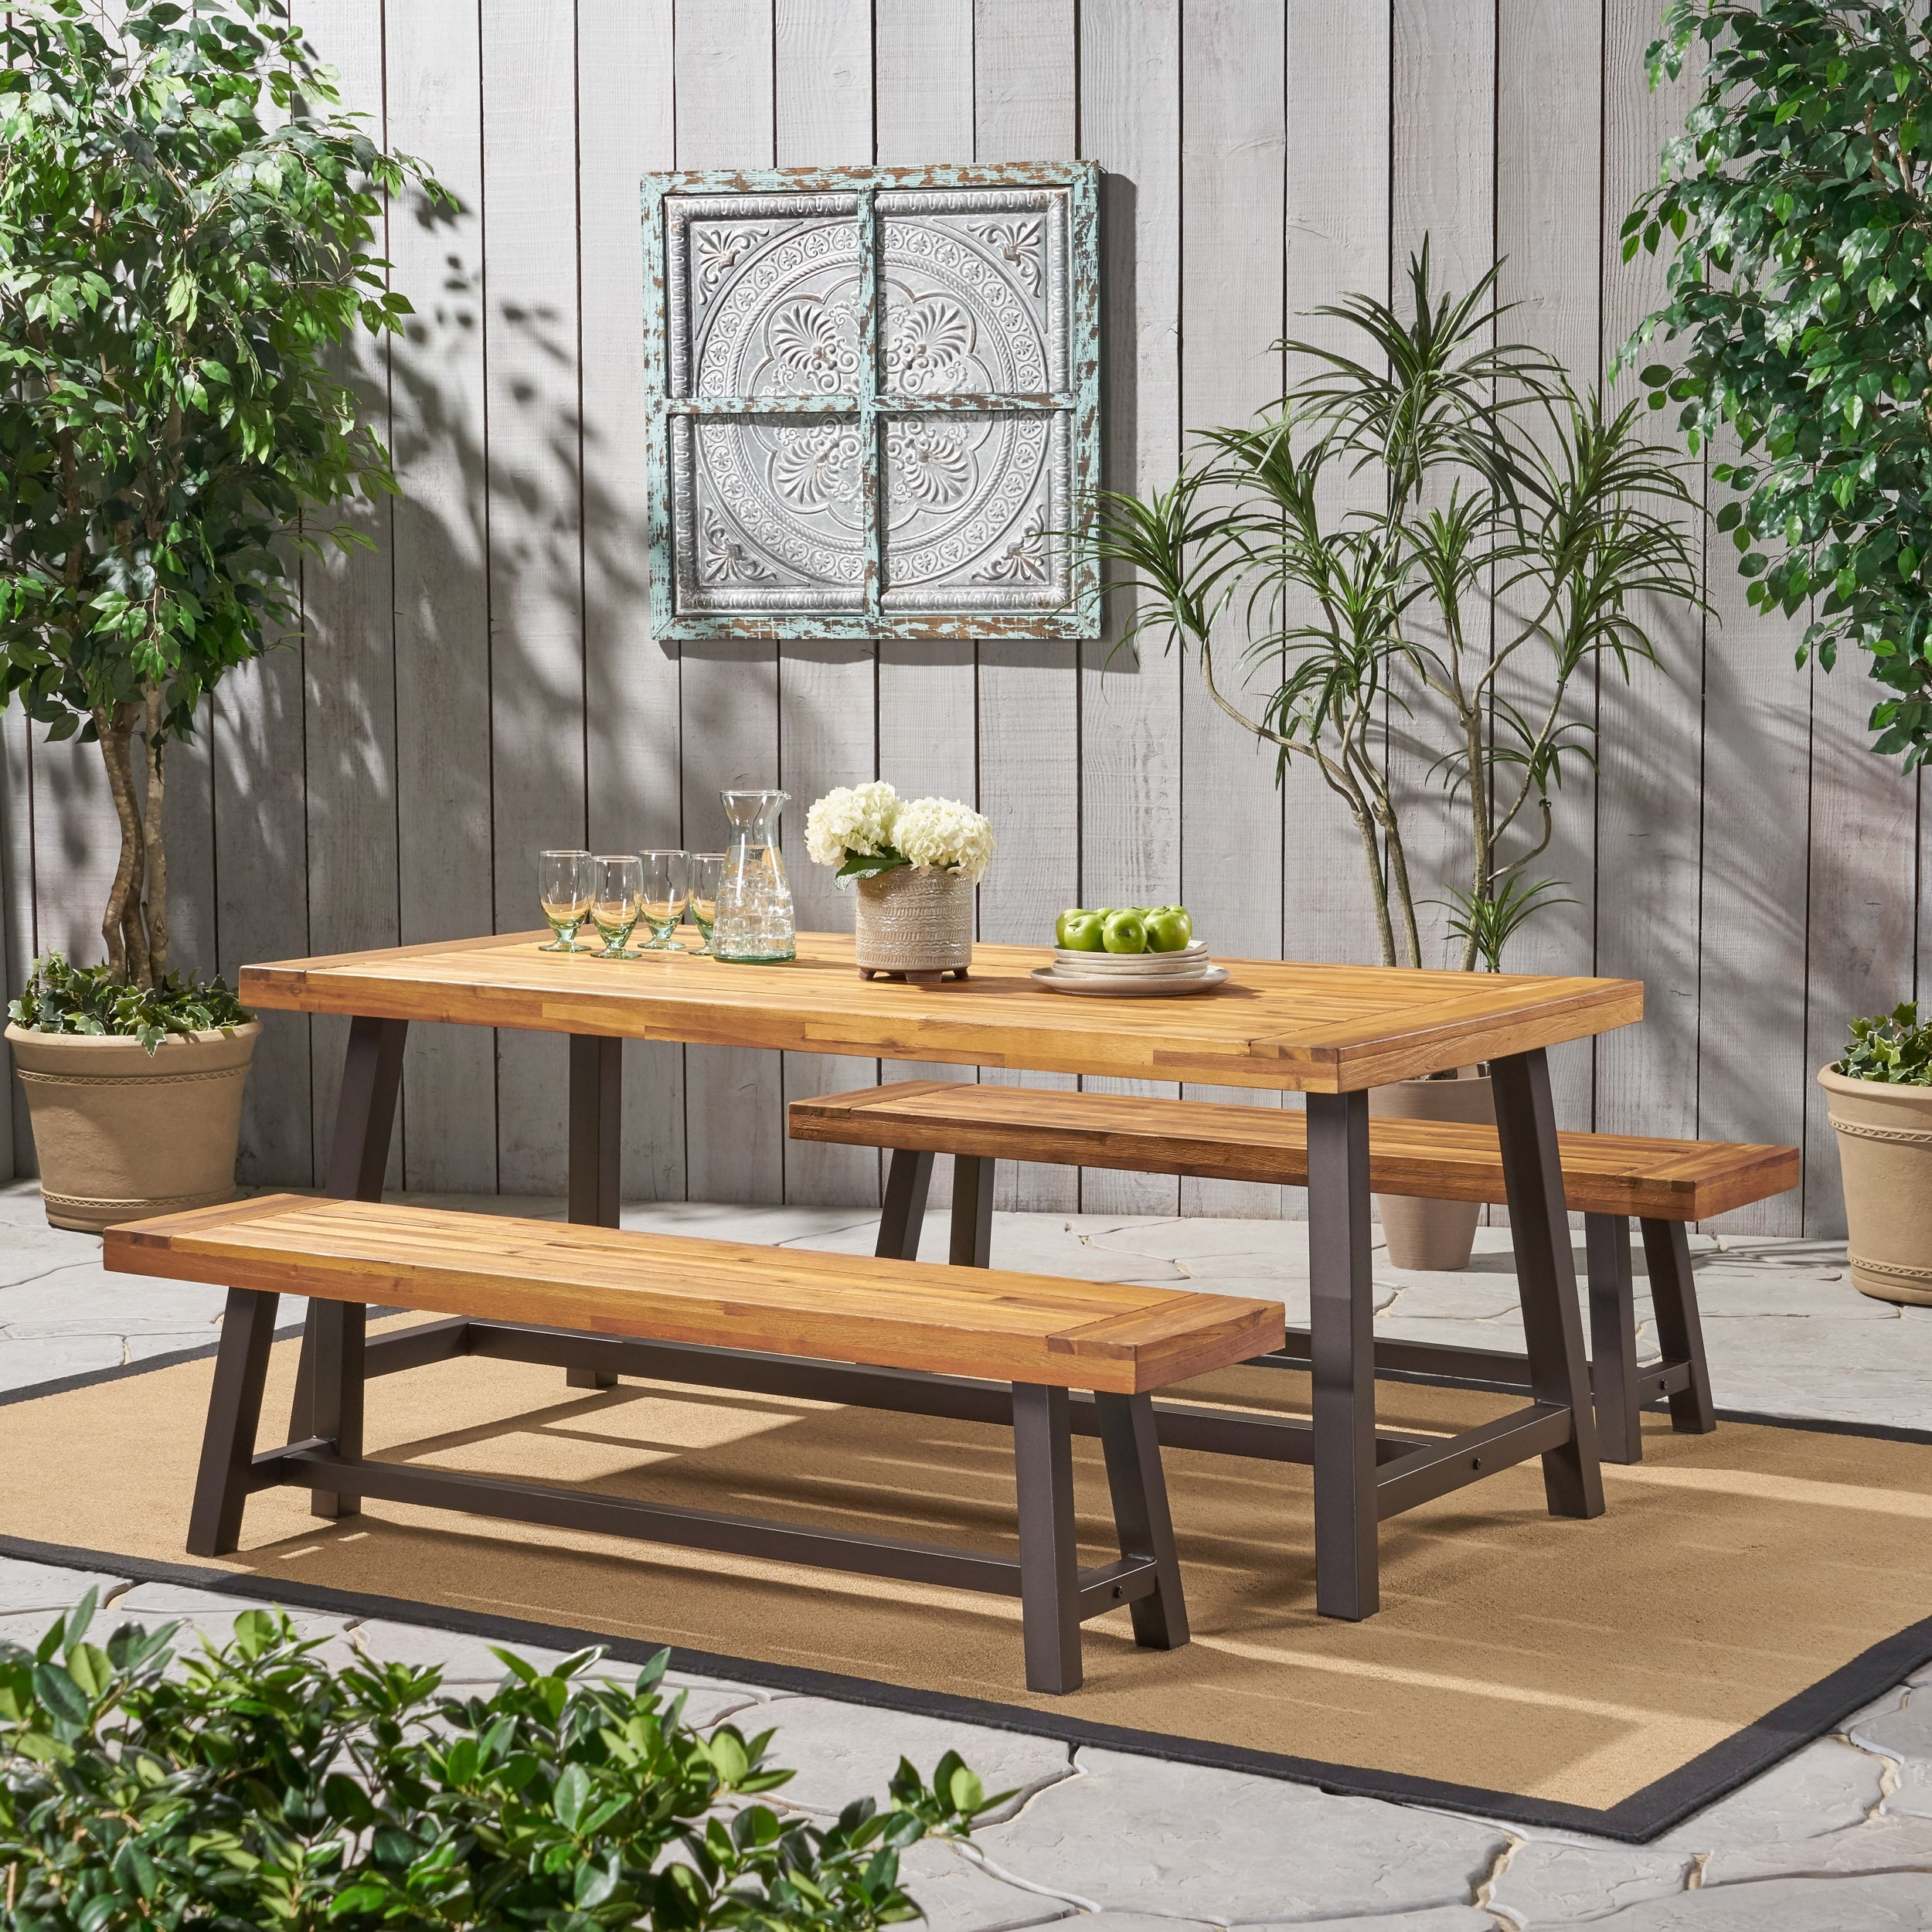 Carlisle Outdoor 3 Piece Acacia Dining Set By Christopher Knight Home On Sale Overstock 8830156